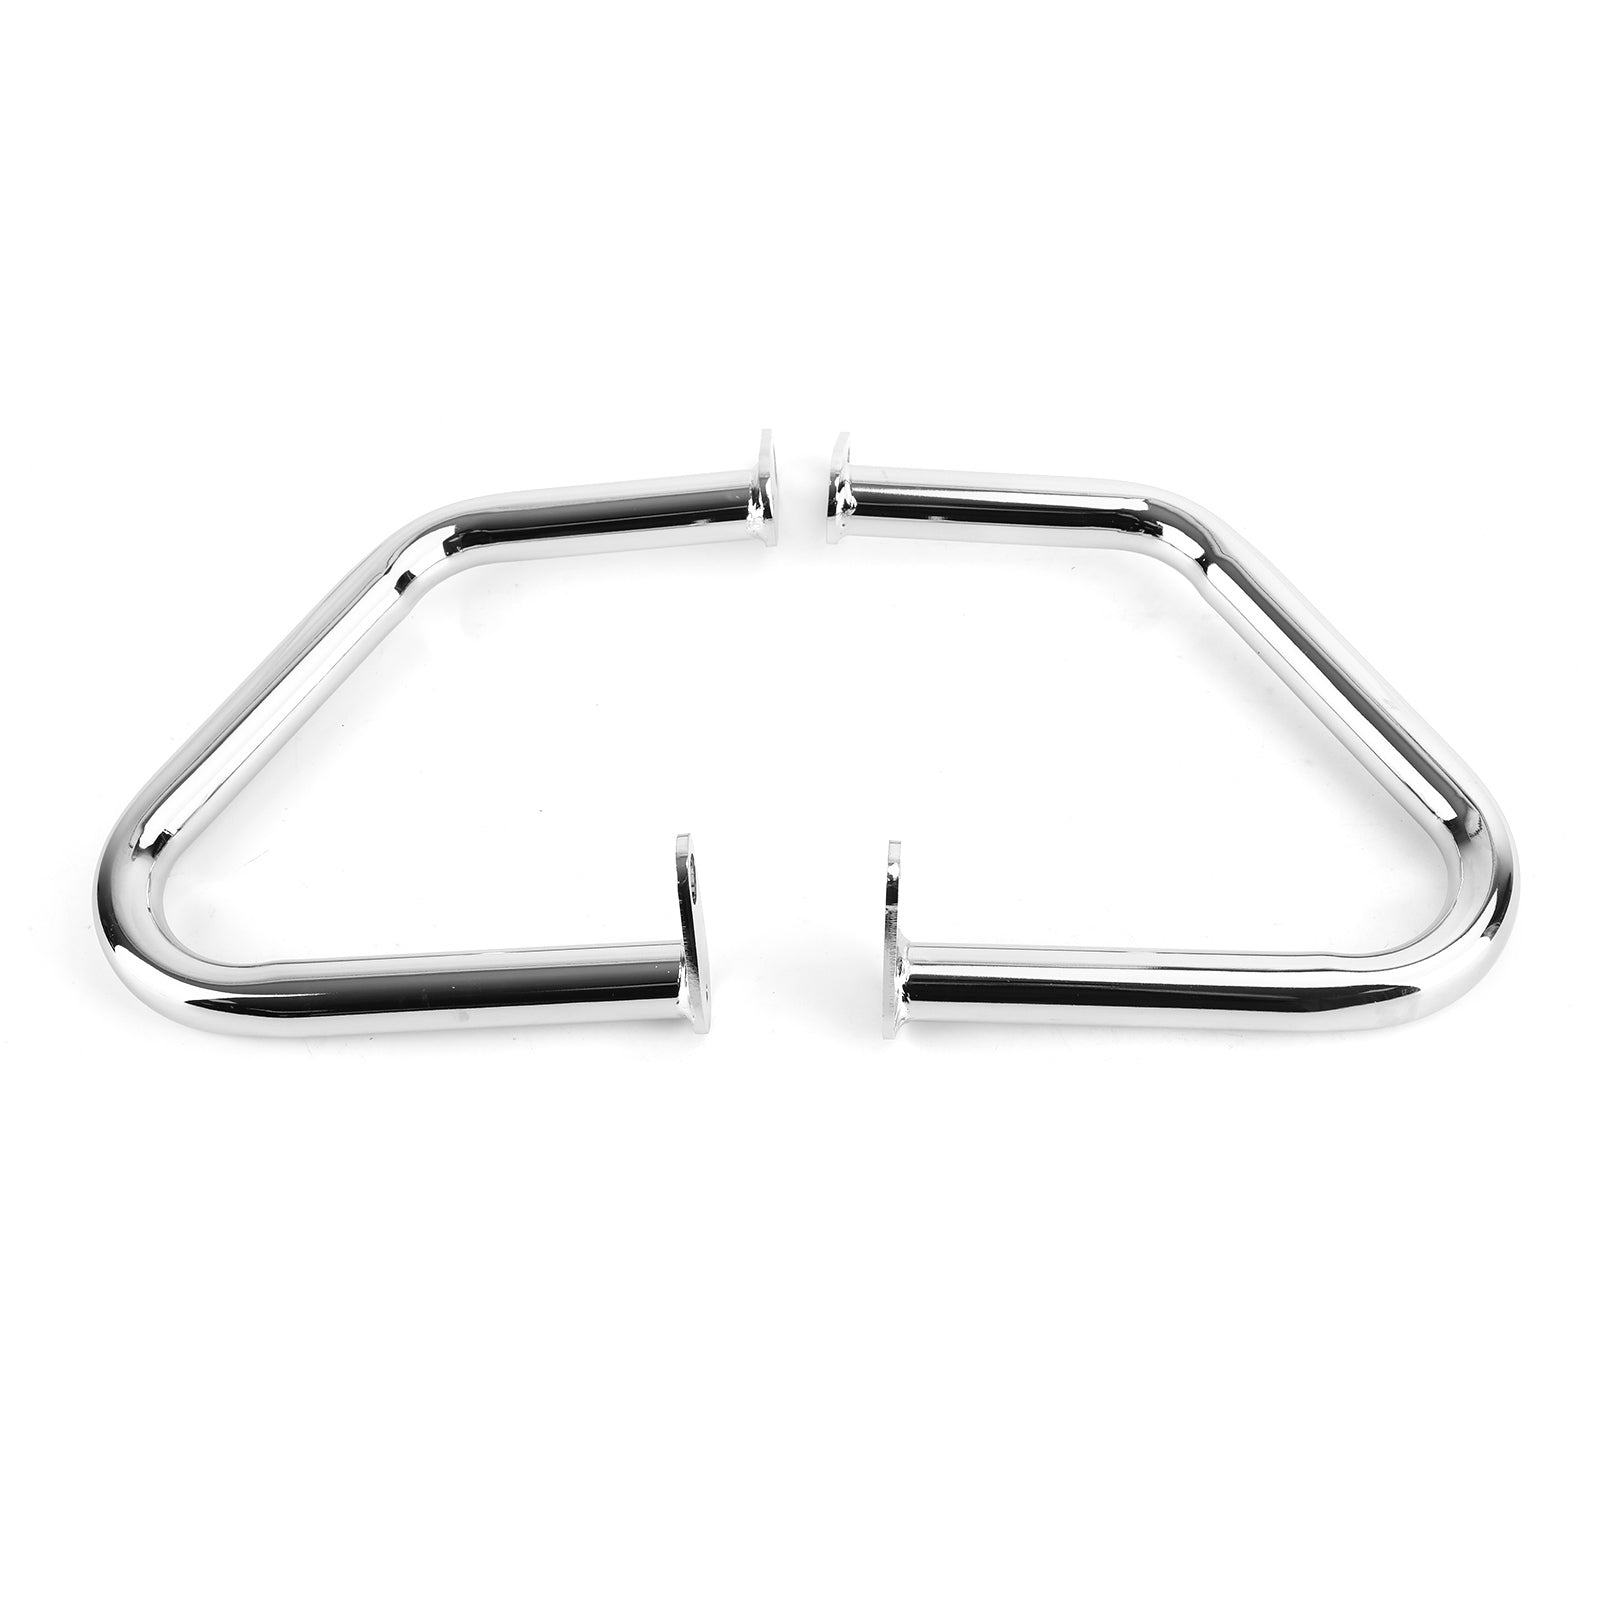 CRASH BAR ENGINE GUARD PROTECTOR Fit for Triumph Street Cup Twin T100 T120 16-20 Generic